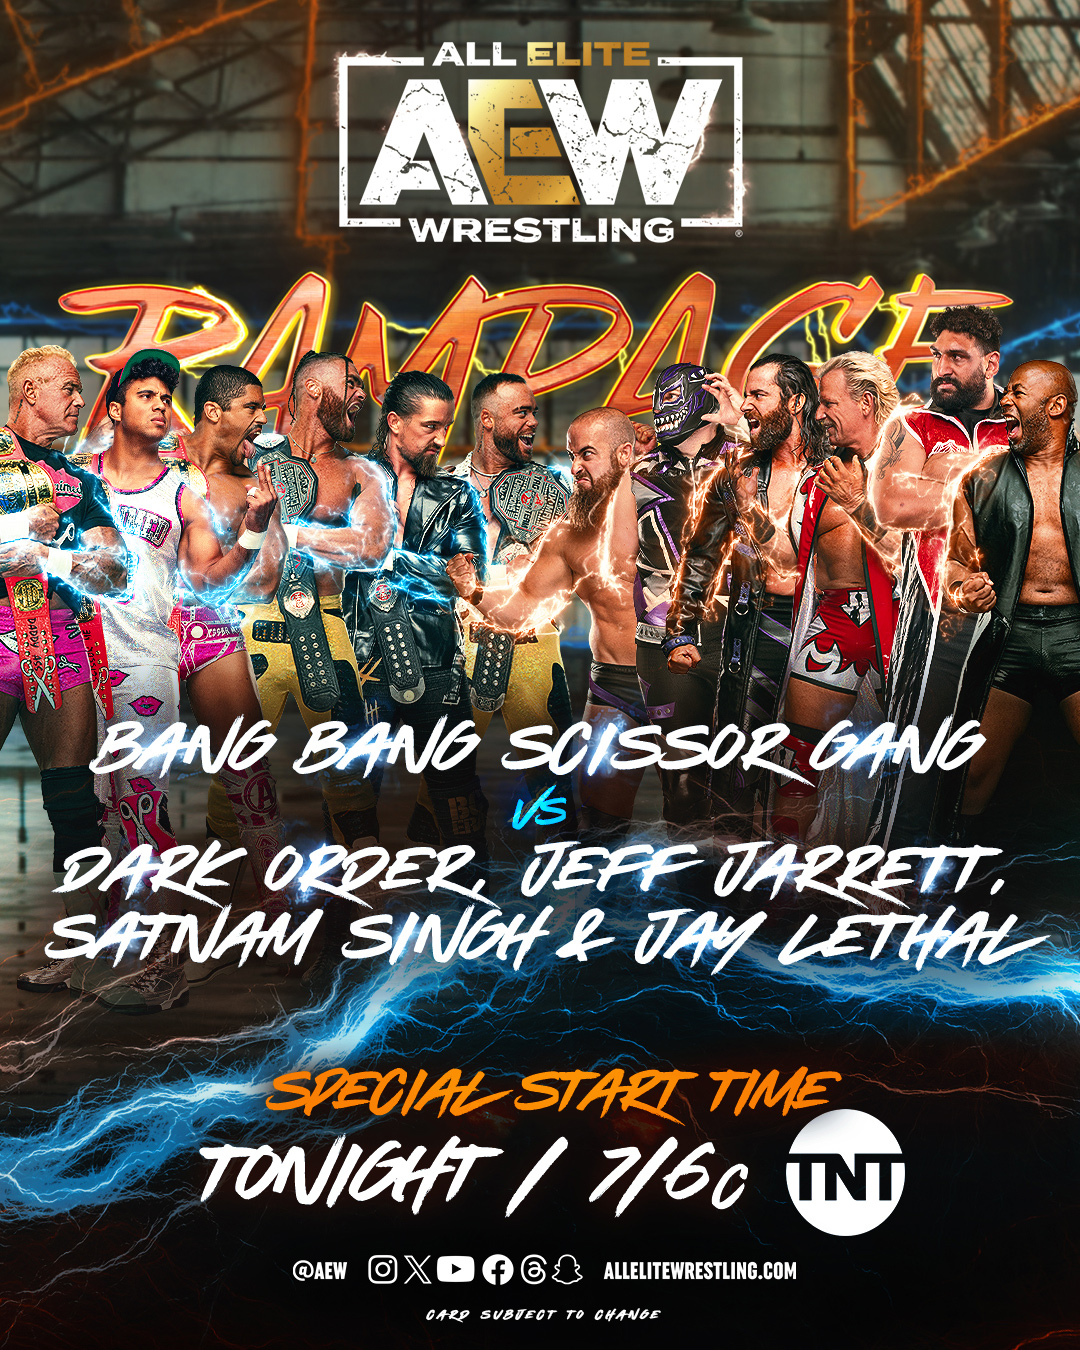 All Elite Wrestling on X: 🚨SPECIAL START TIME🚨 TONIGHT 7pm ET